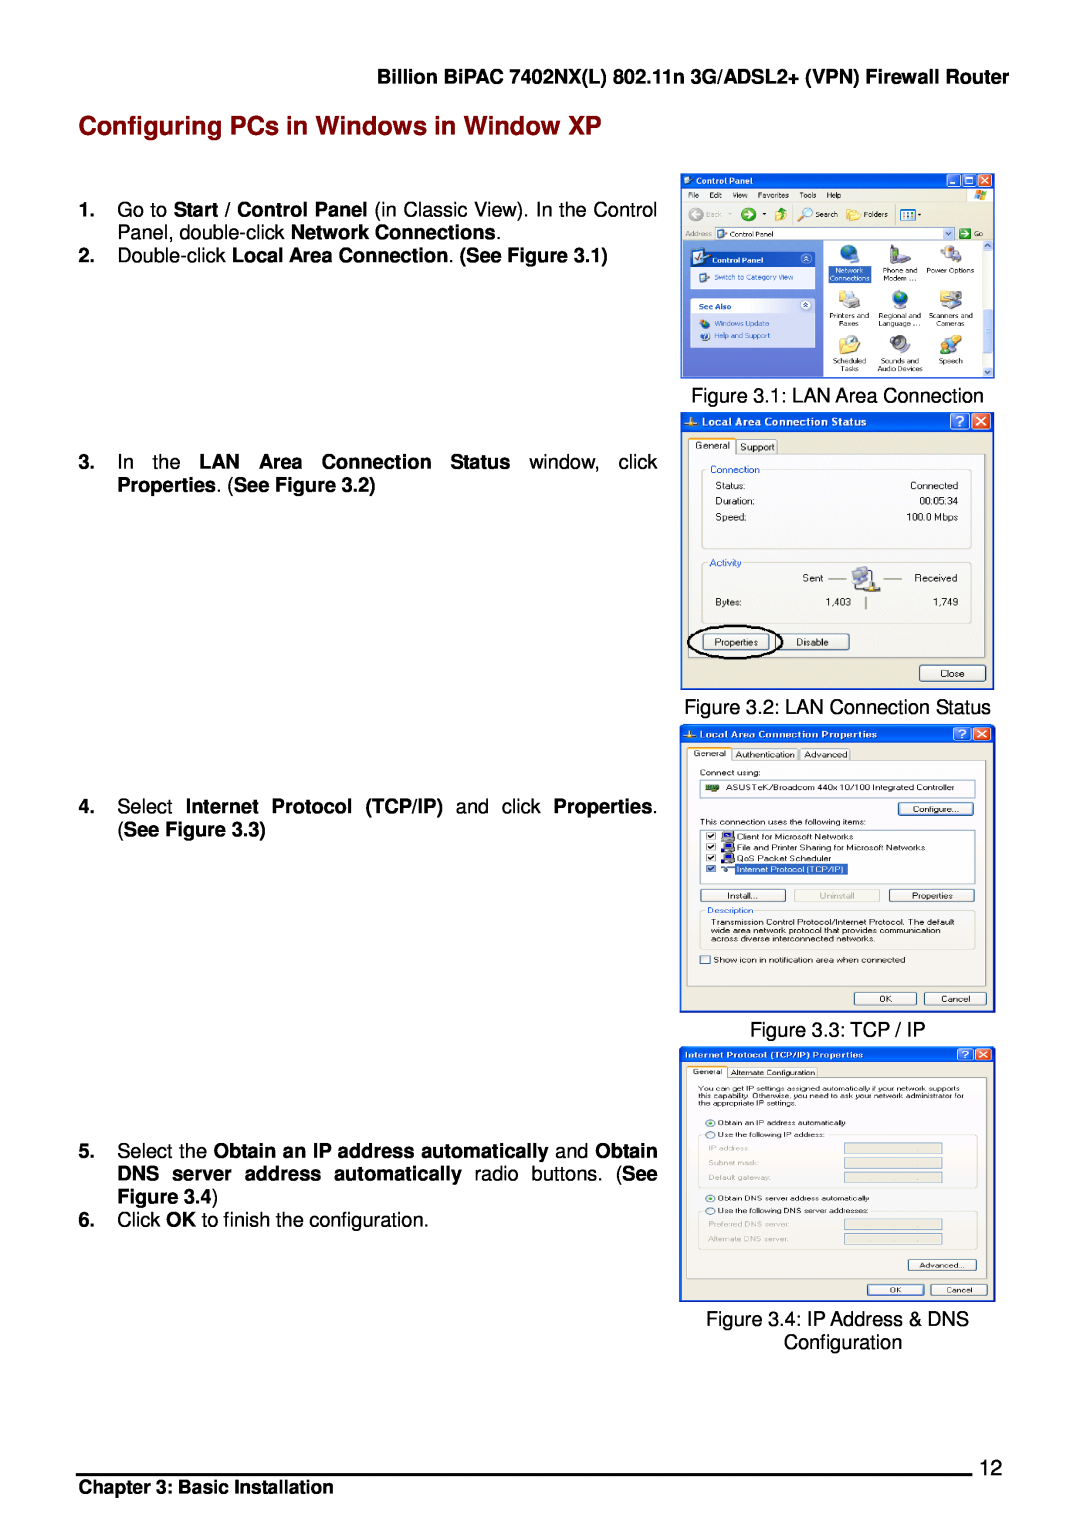 Billion Electric Company 7402NX Configuring PCs in Windows in Window XP, Double-click Local Area Connection. See Figure 